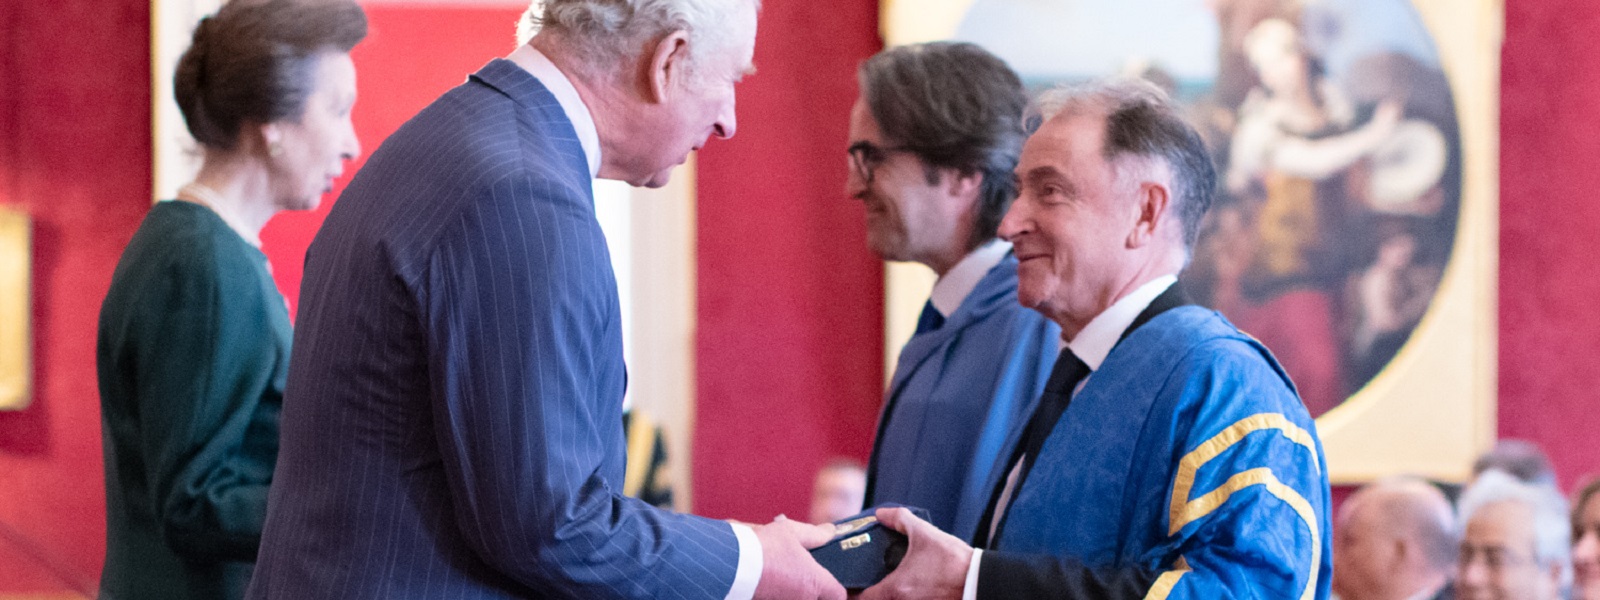 Professor Sir Jim McDonald accepting Queen's Anniversary Prize from HRH The Prince of Wales.